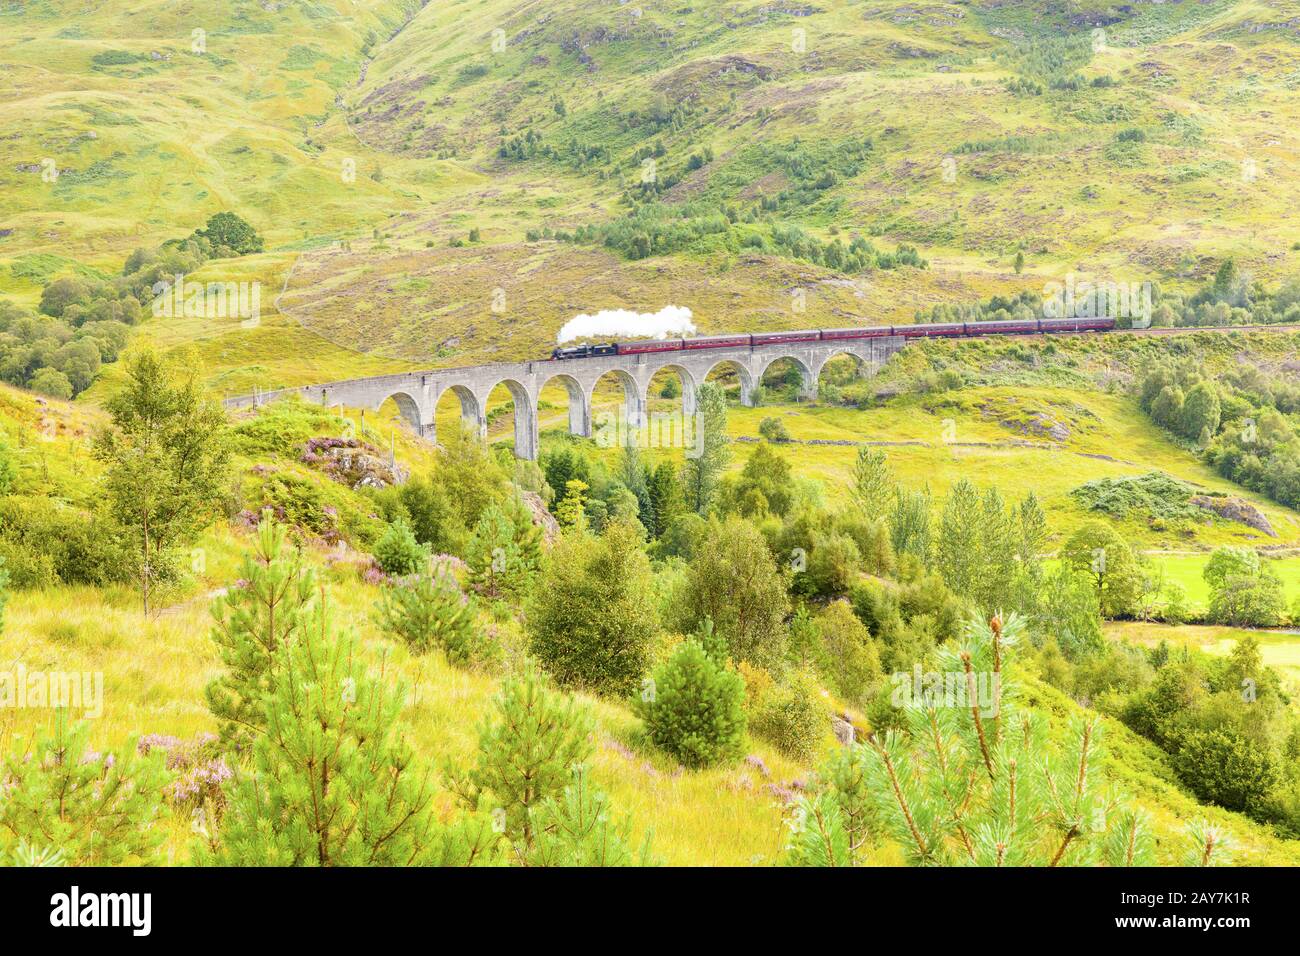 The famous Glenfinnan viaduct carries the railway to Glenfinnan Station Scotland Stock Photo